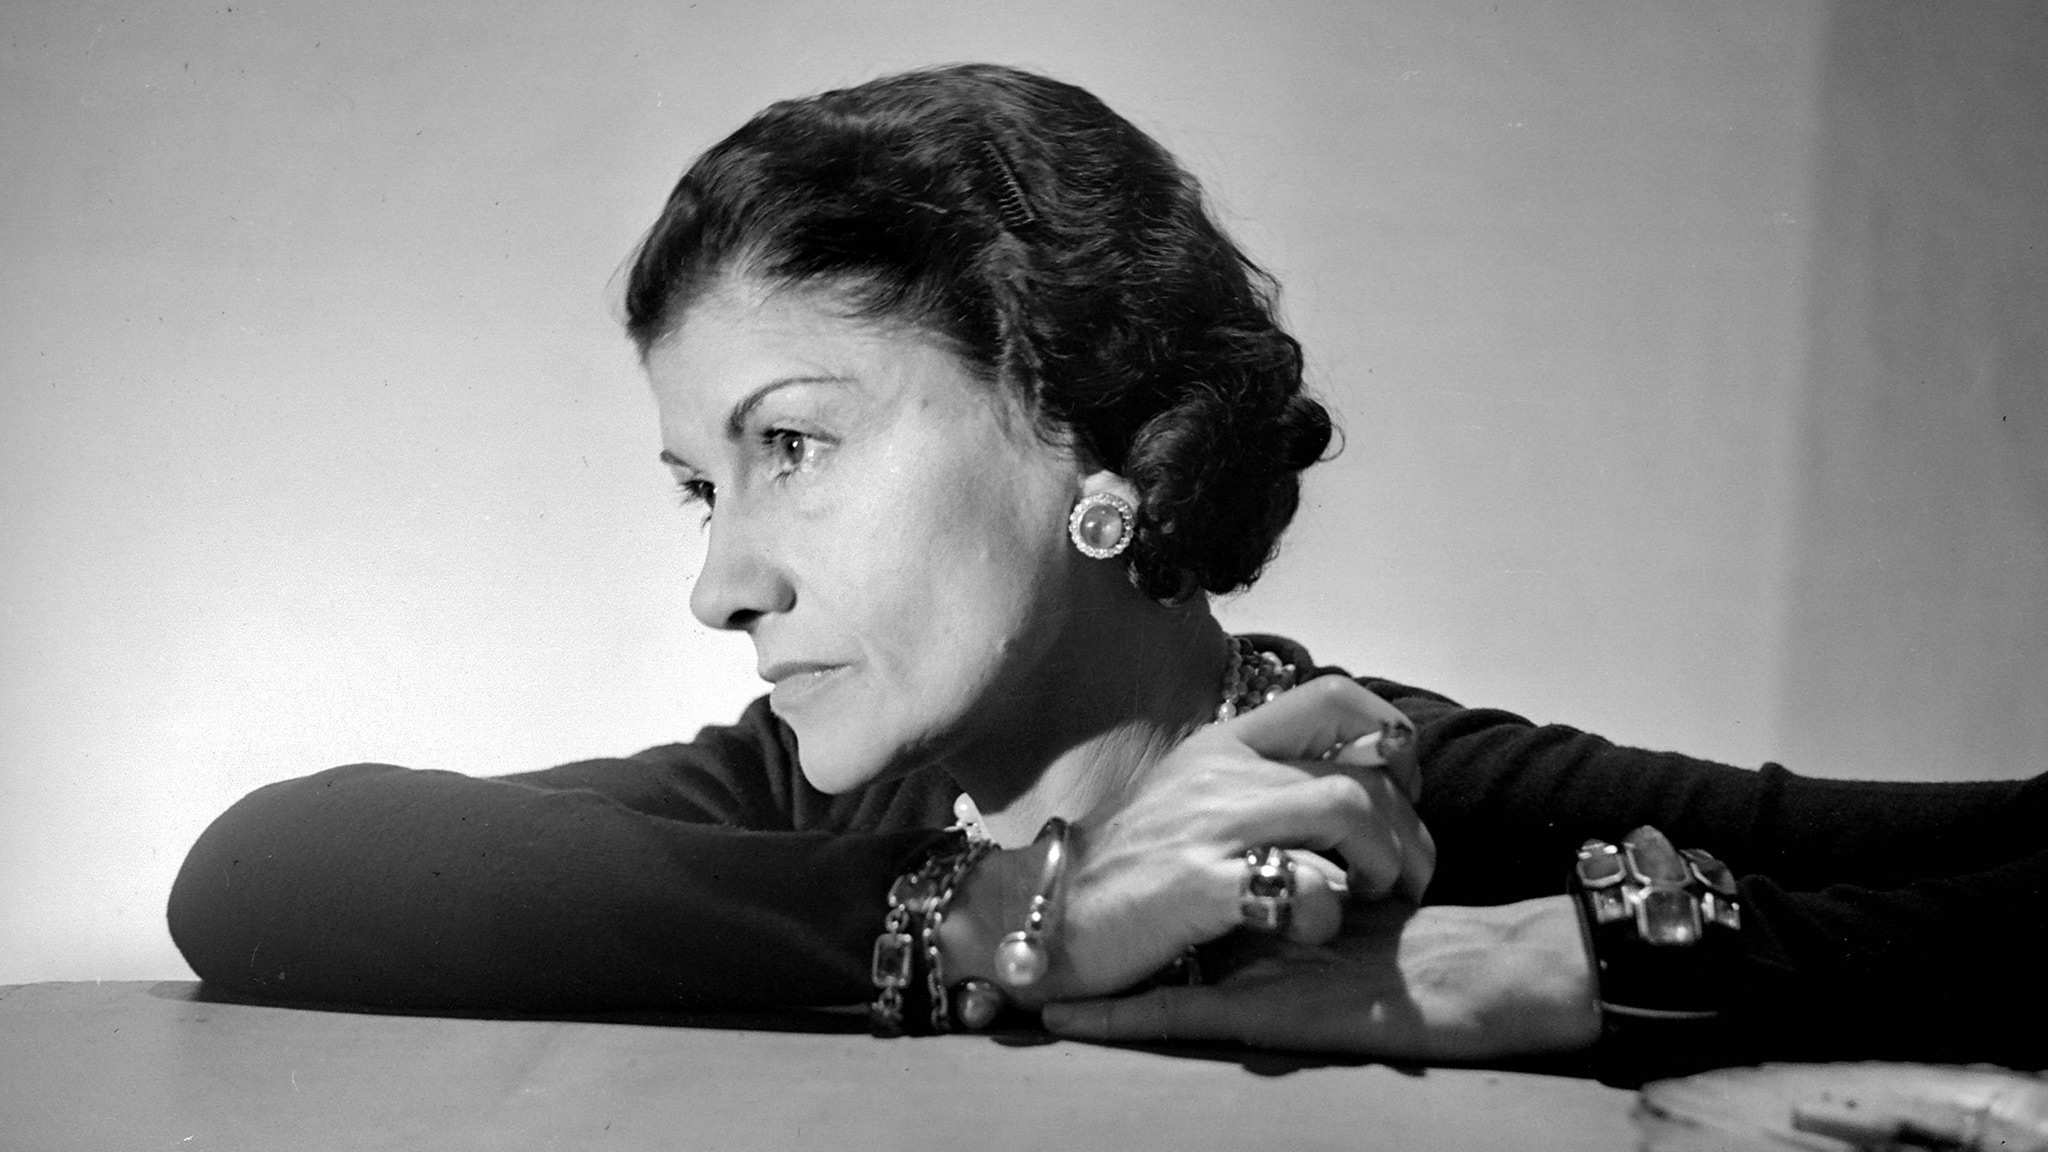 All the details on the VAs major Coco Chanel exhibition